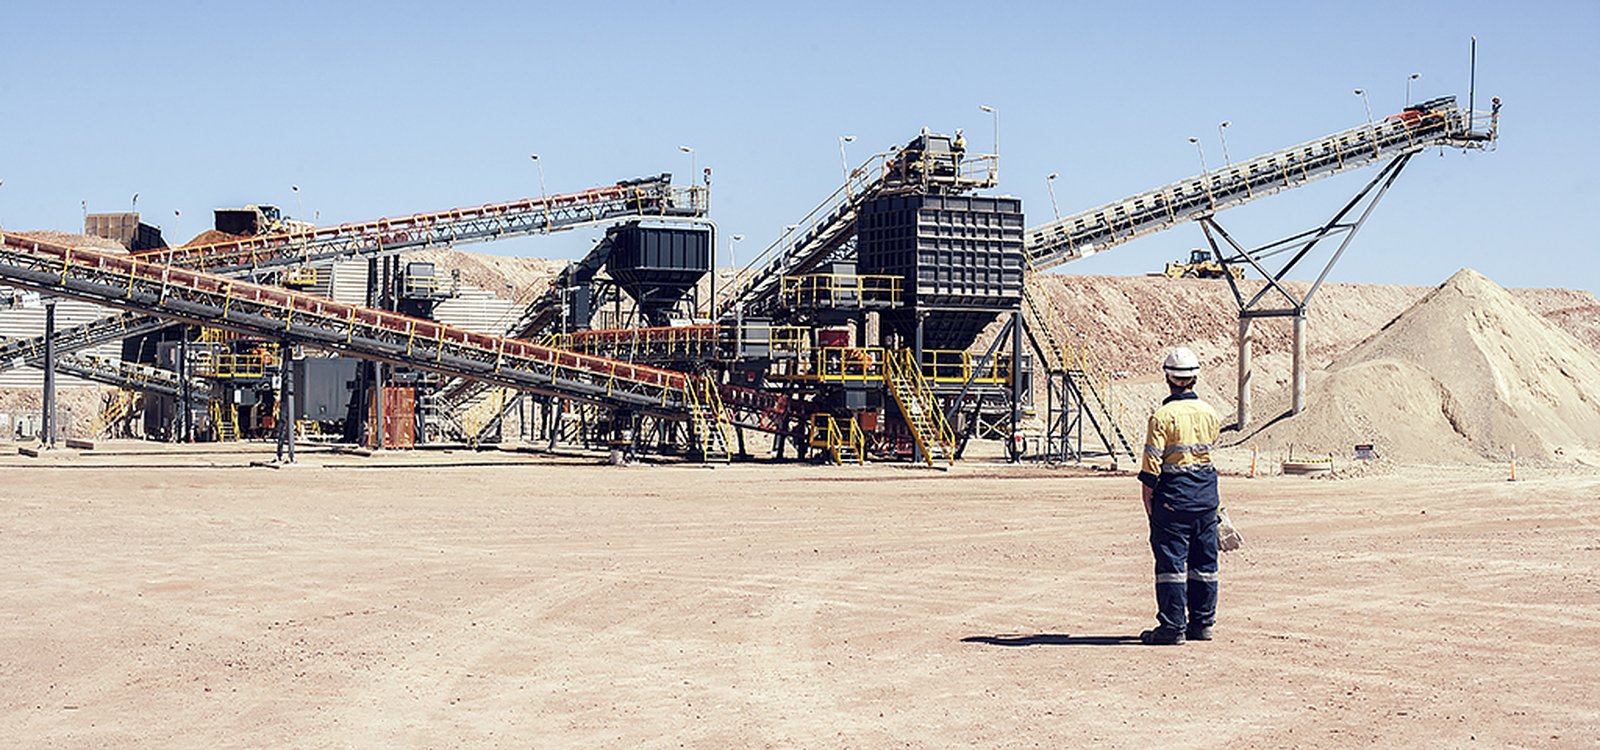 The crushing and screening plant has an important role in maintaining efficiency for Rosemont, and is an integral part of the mine’s operation. 